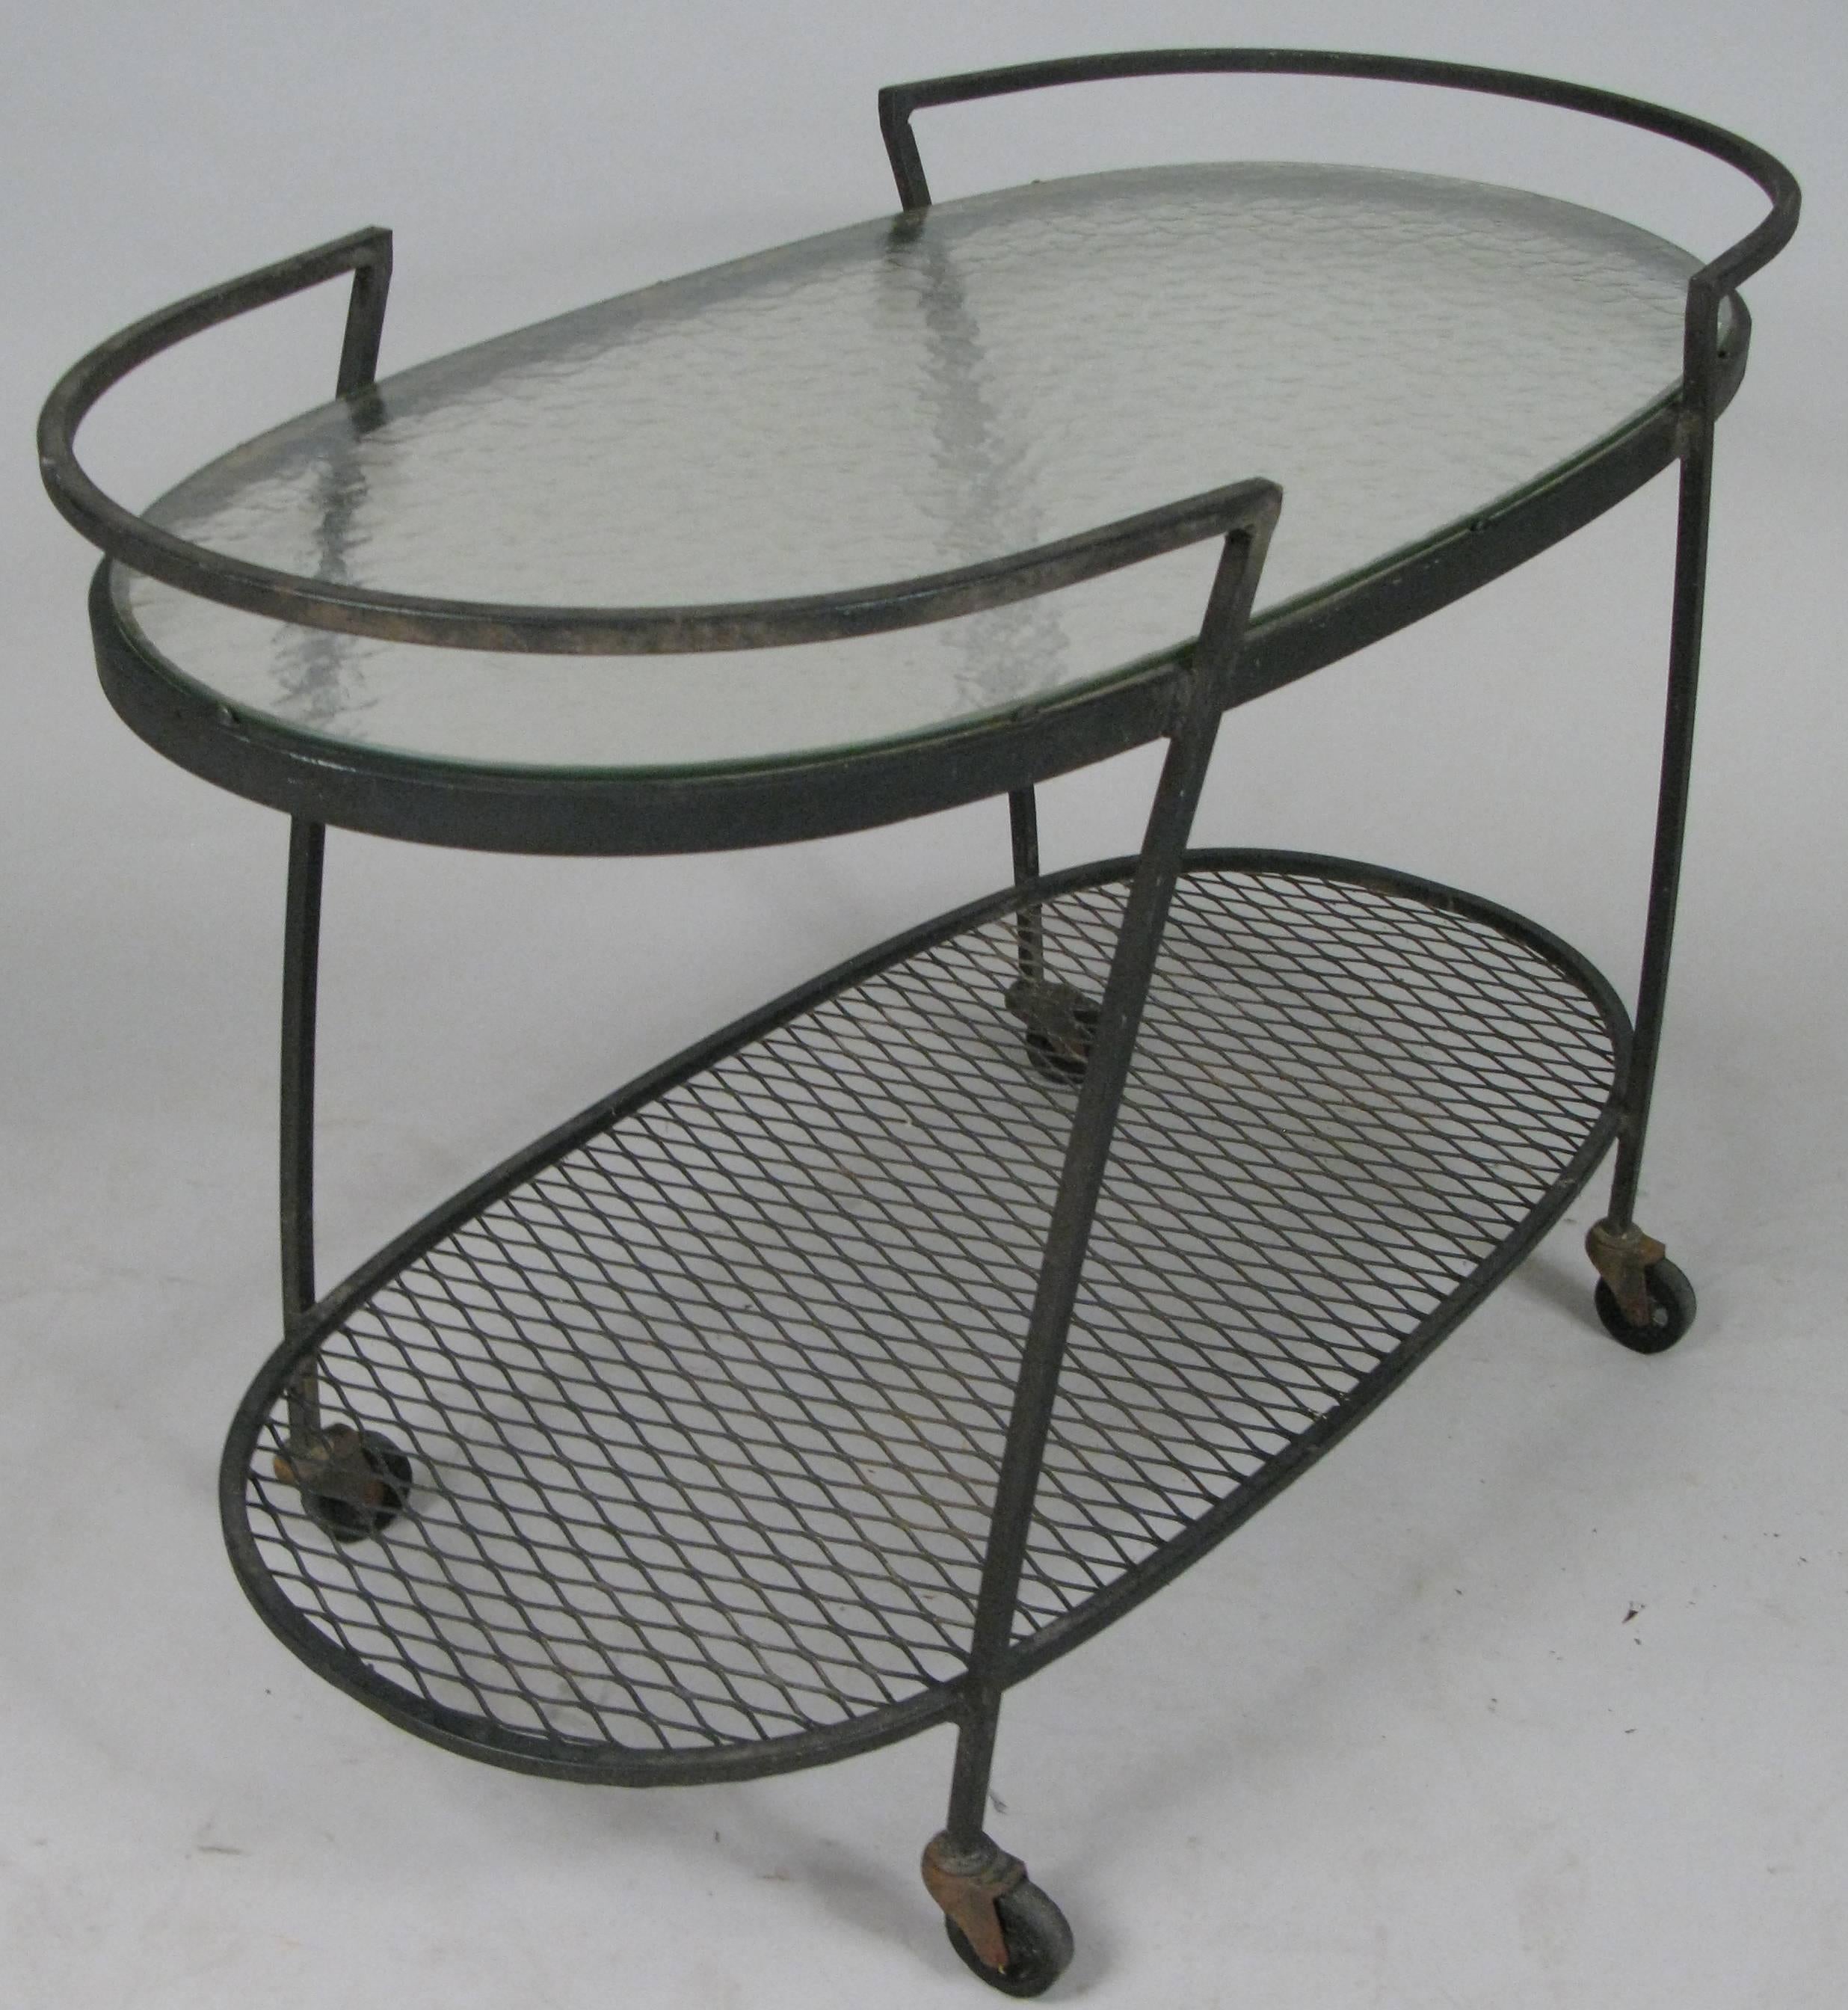 One of the best of Woodard's series of wrought iron rolling bar carts from the 1950s, this oval design has a low steel mesh shelf, and a large glass oval top. The handles curve around the ends and provide a rim to keep bottles and glass on the cart.